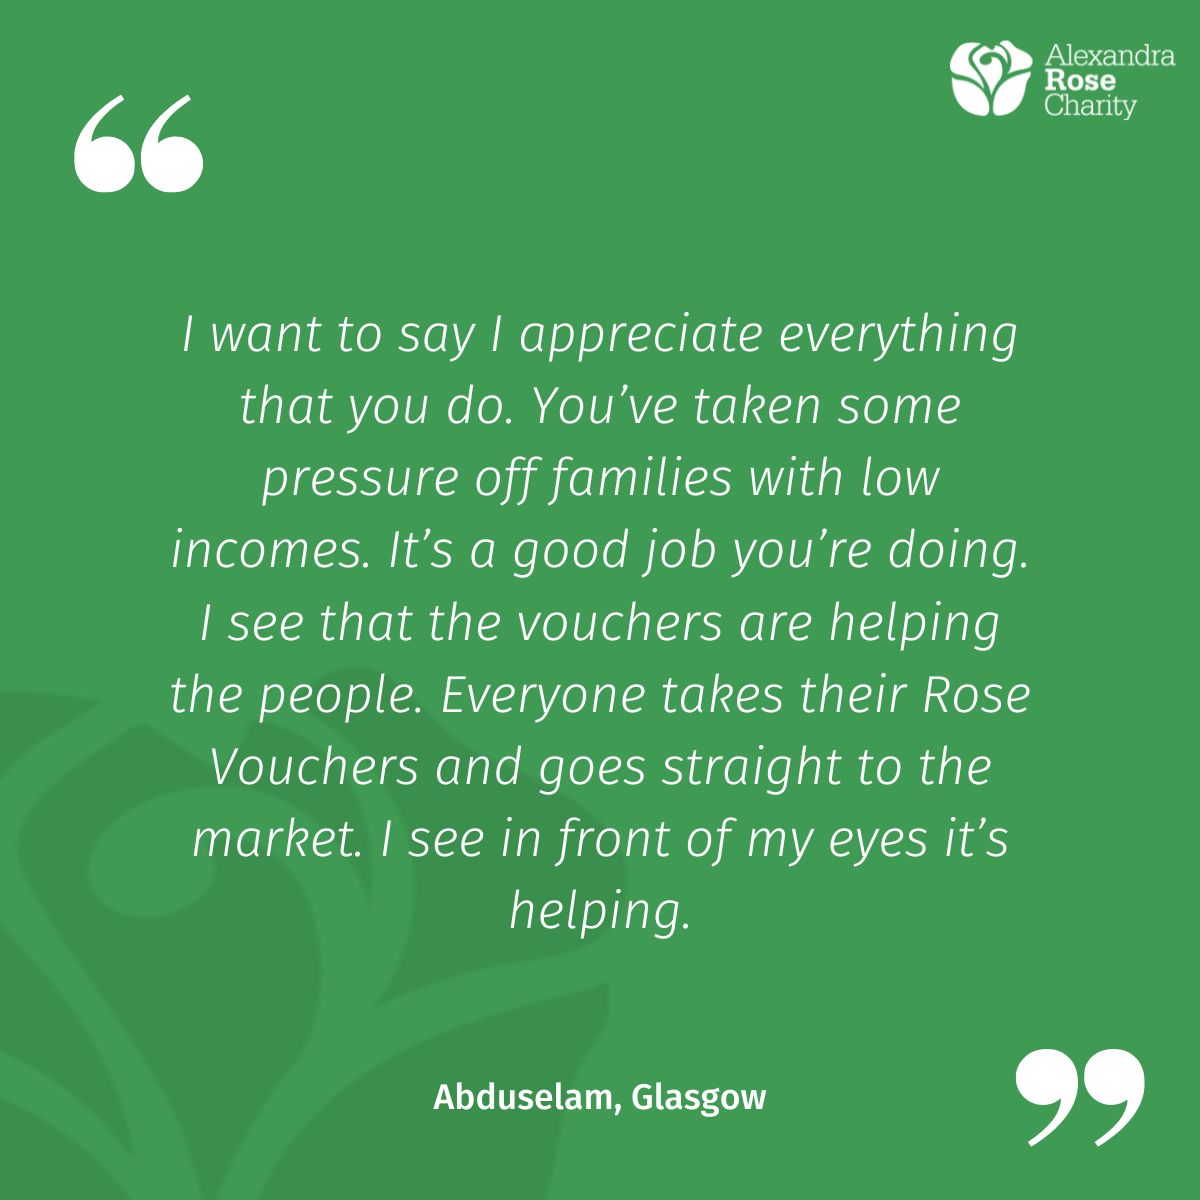 'Living conditions have become very difficult since the pandemic, so everything helps. Sometimes I get enough money to live on from my job, & sometimes I don’t... My kids, they like berries, like strawberries & raspberries. I use my Rose Vouchers to buy these.' Abduselam #Glasgow